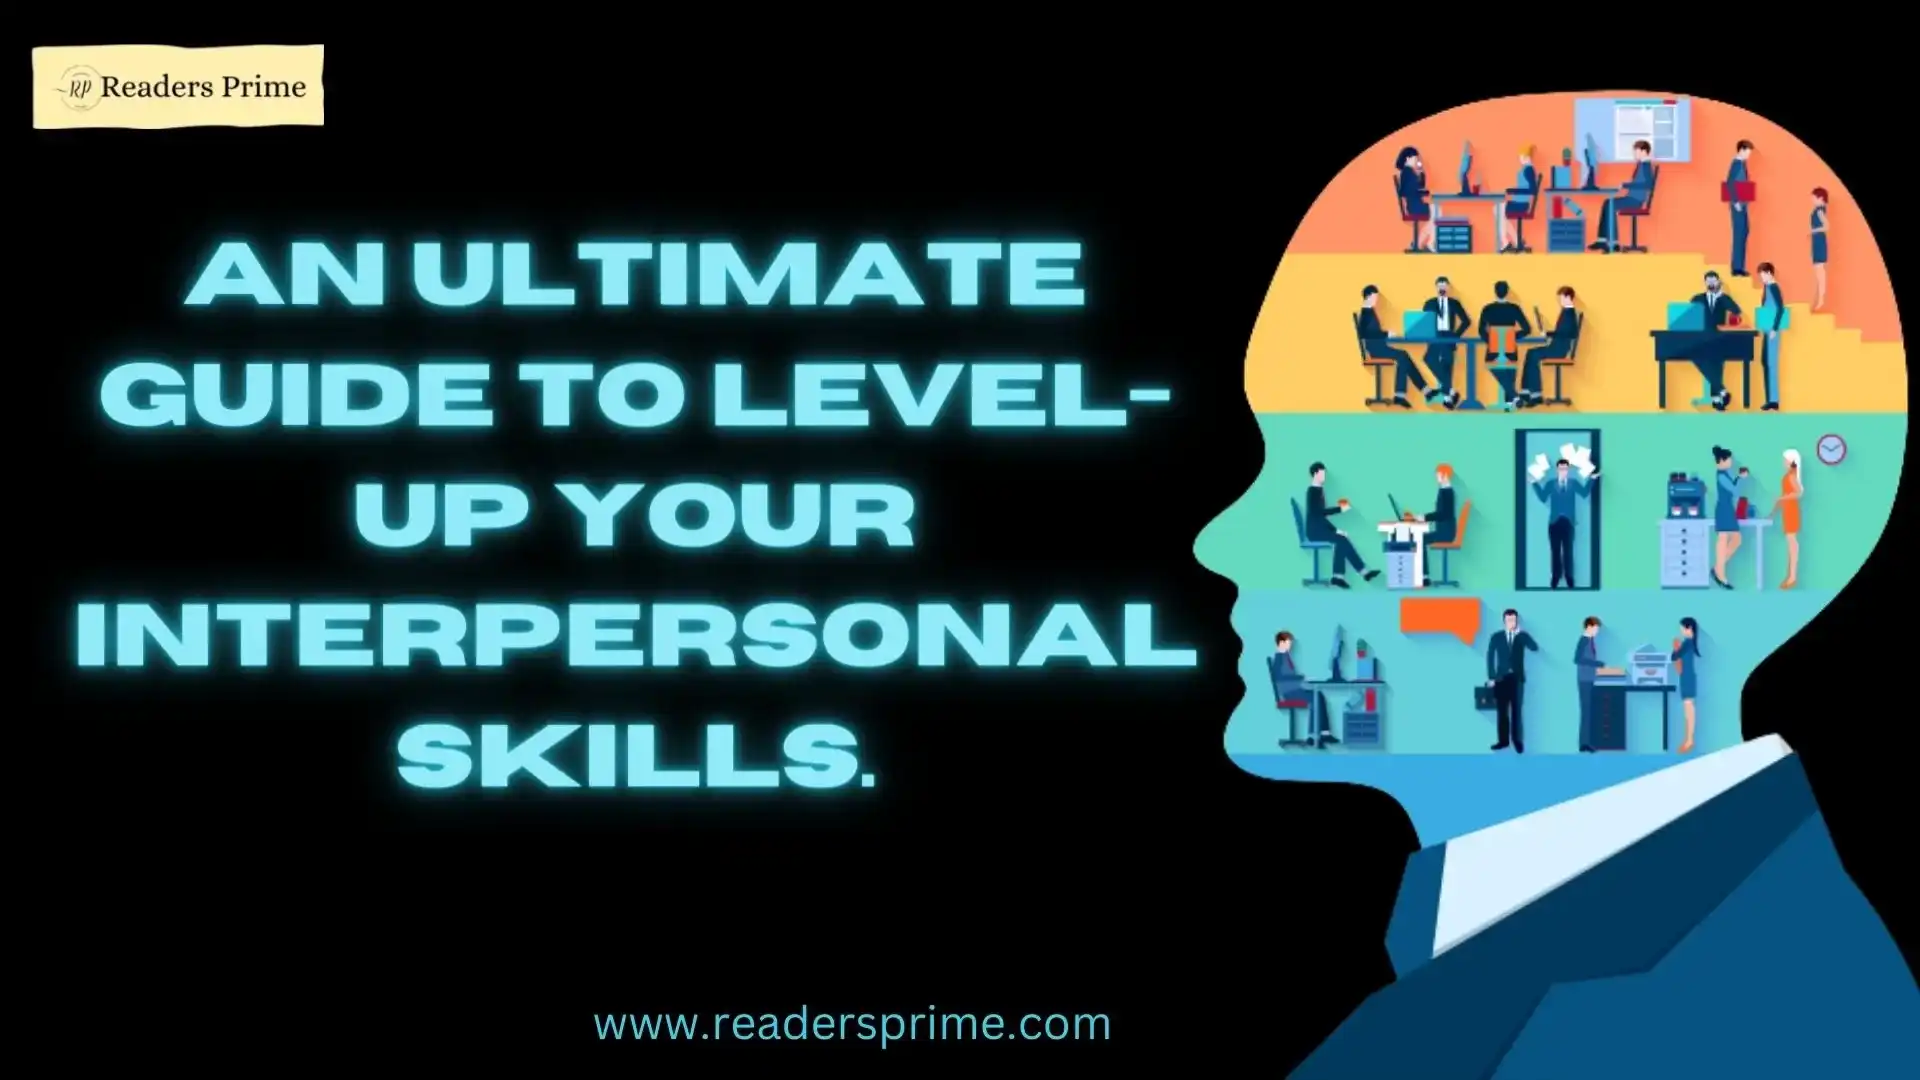 An Ultimate Guide to Level-Up Your Interpersonal Skills